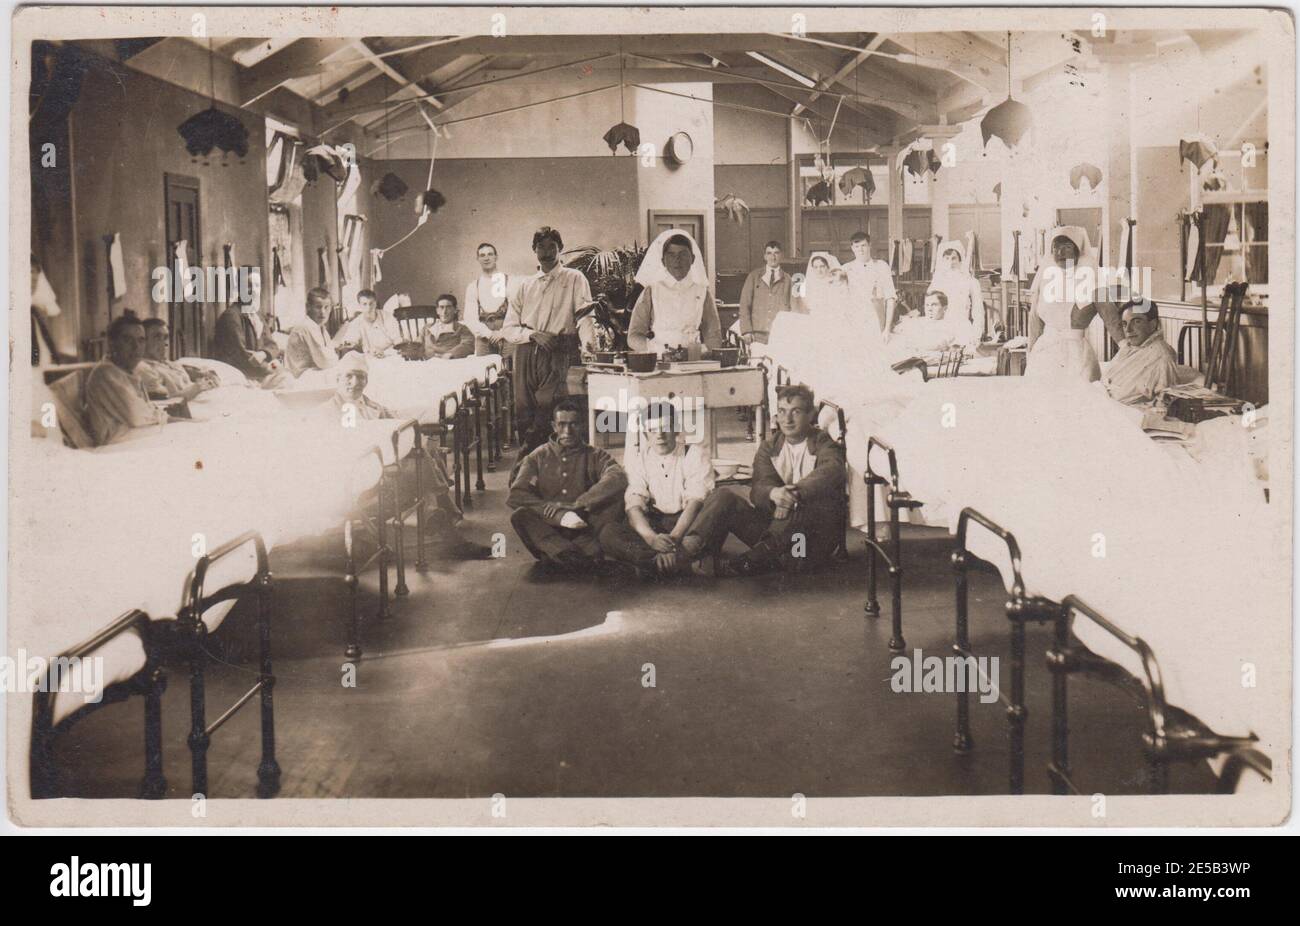 Ward of a First World War military hospital. Patients, many wearing hospital blue uniforms, are sitting up in their beds, sitting in the central aisle and standing towards the back of the room. Nurses are standing by the beds and behind a trolley in the centre aisle. Stock Photo